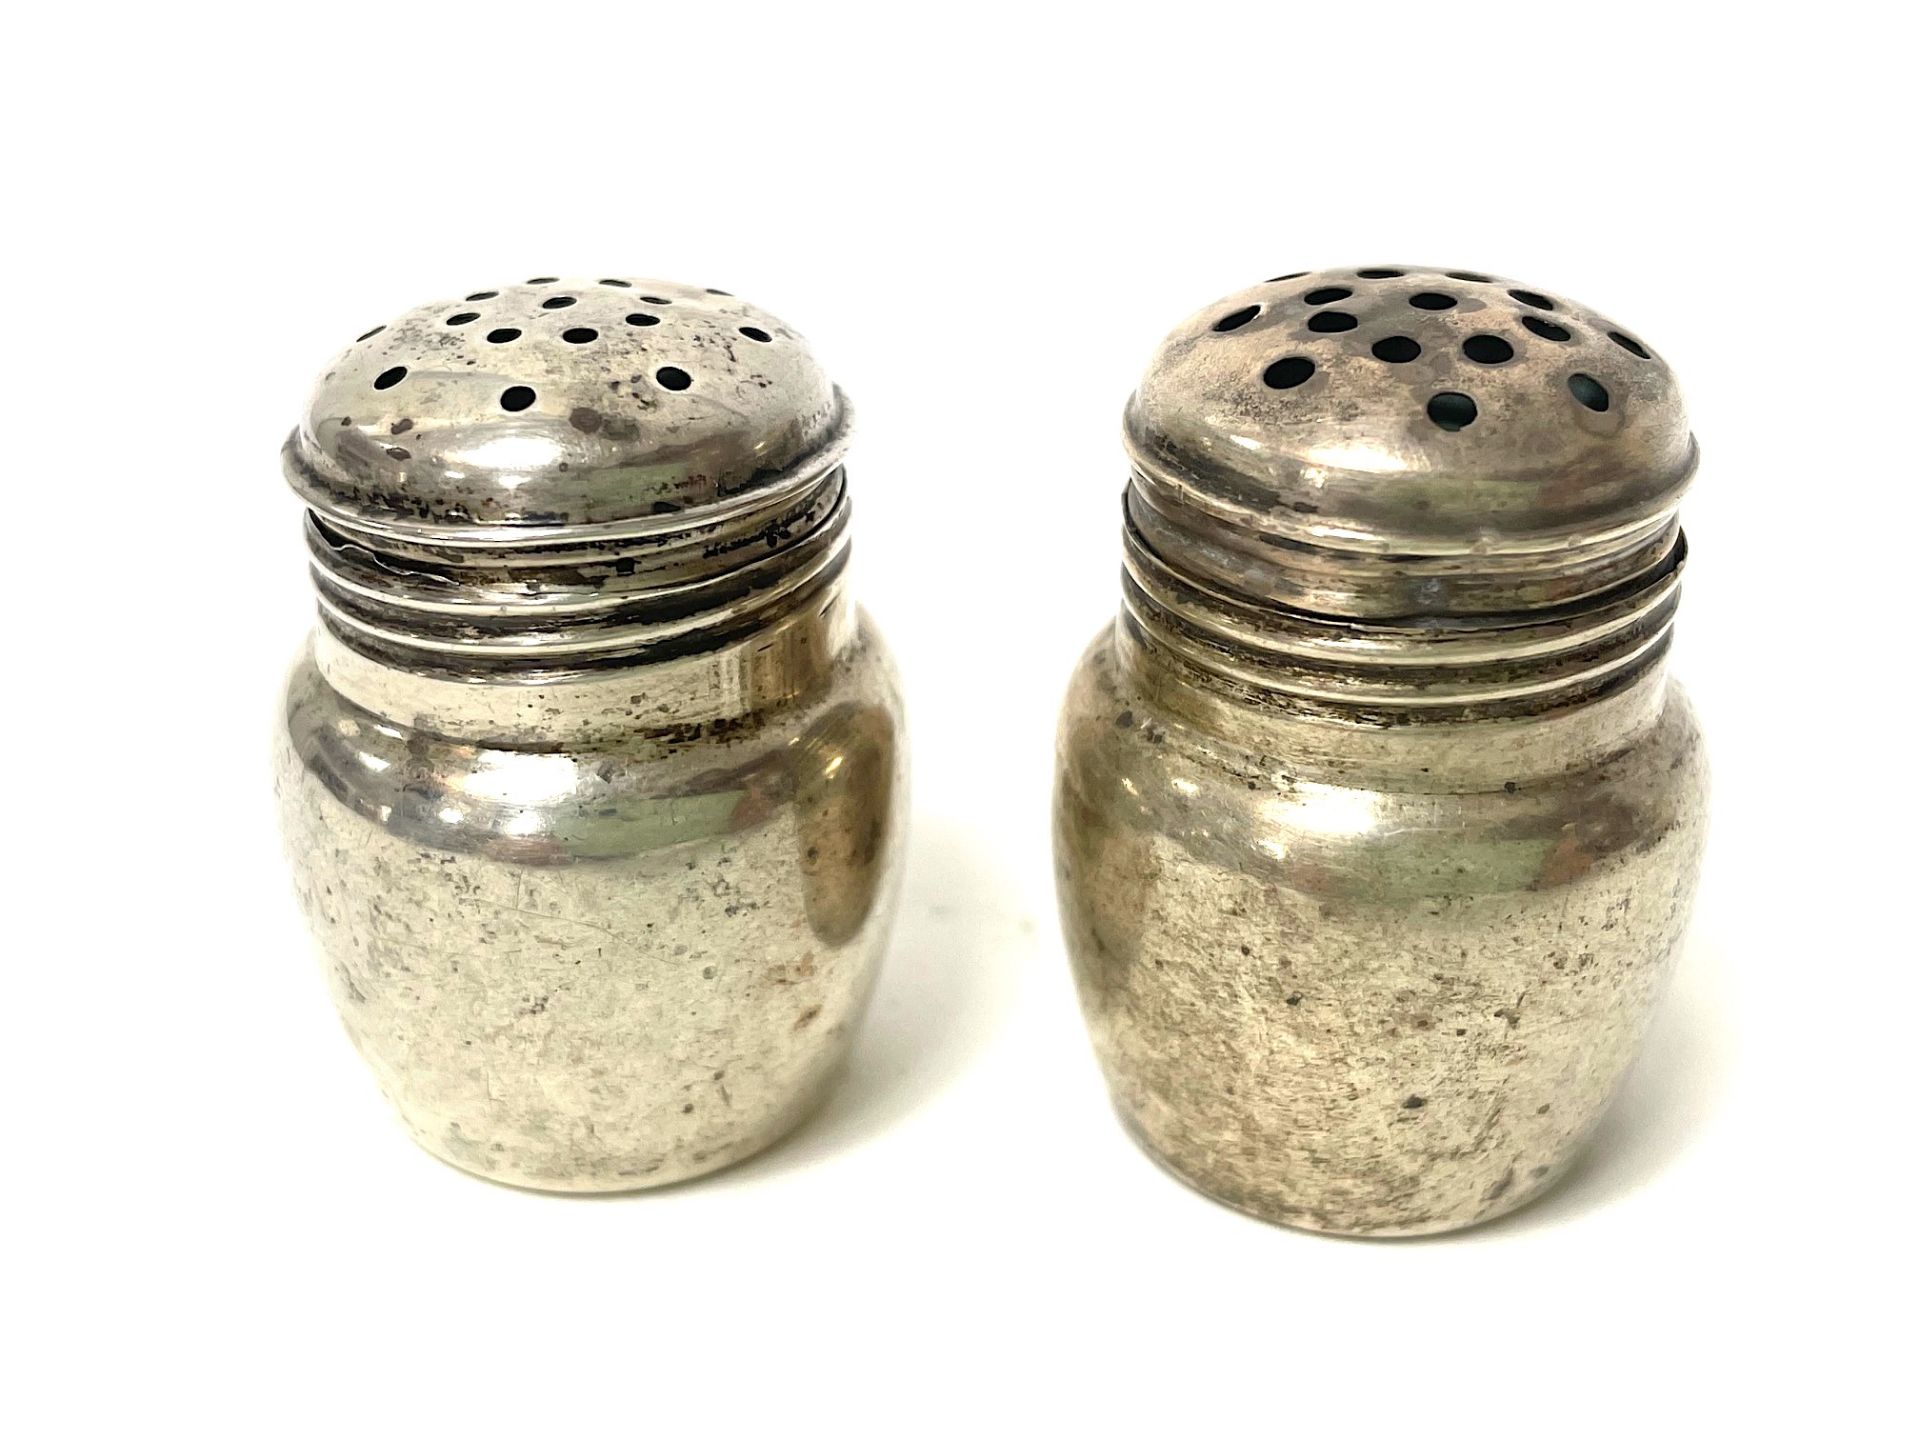 40 pairs of salt/pepper and spice shakers, - Image 20 of 88